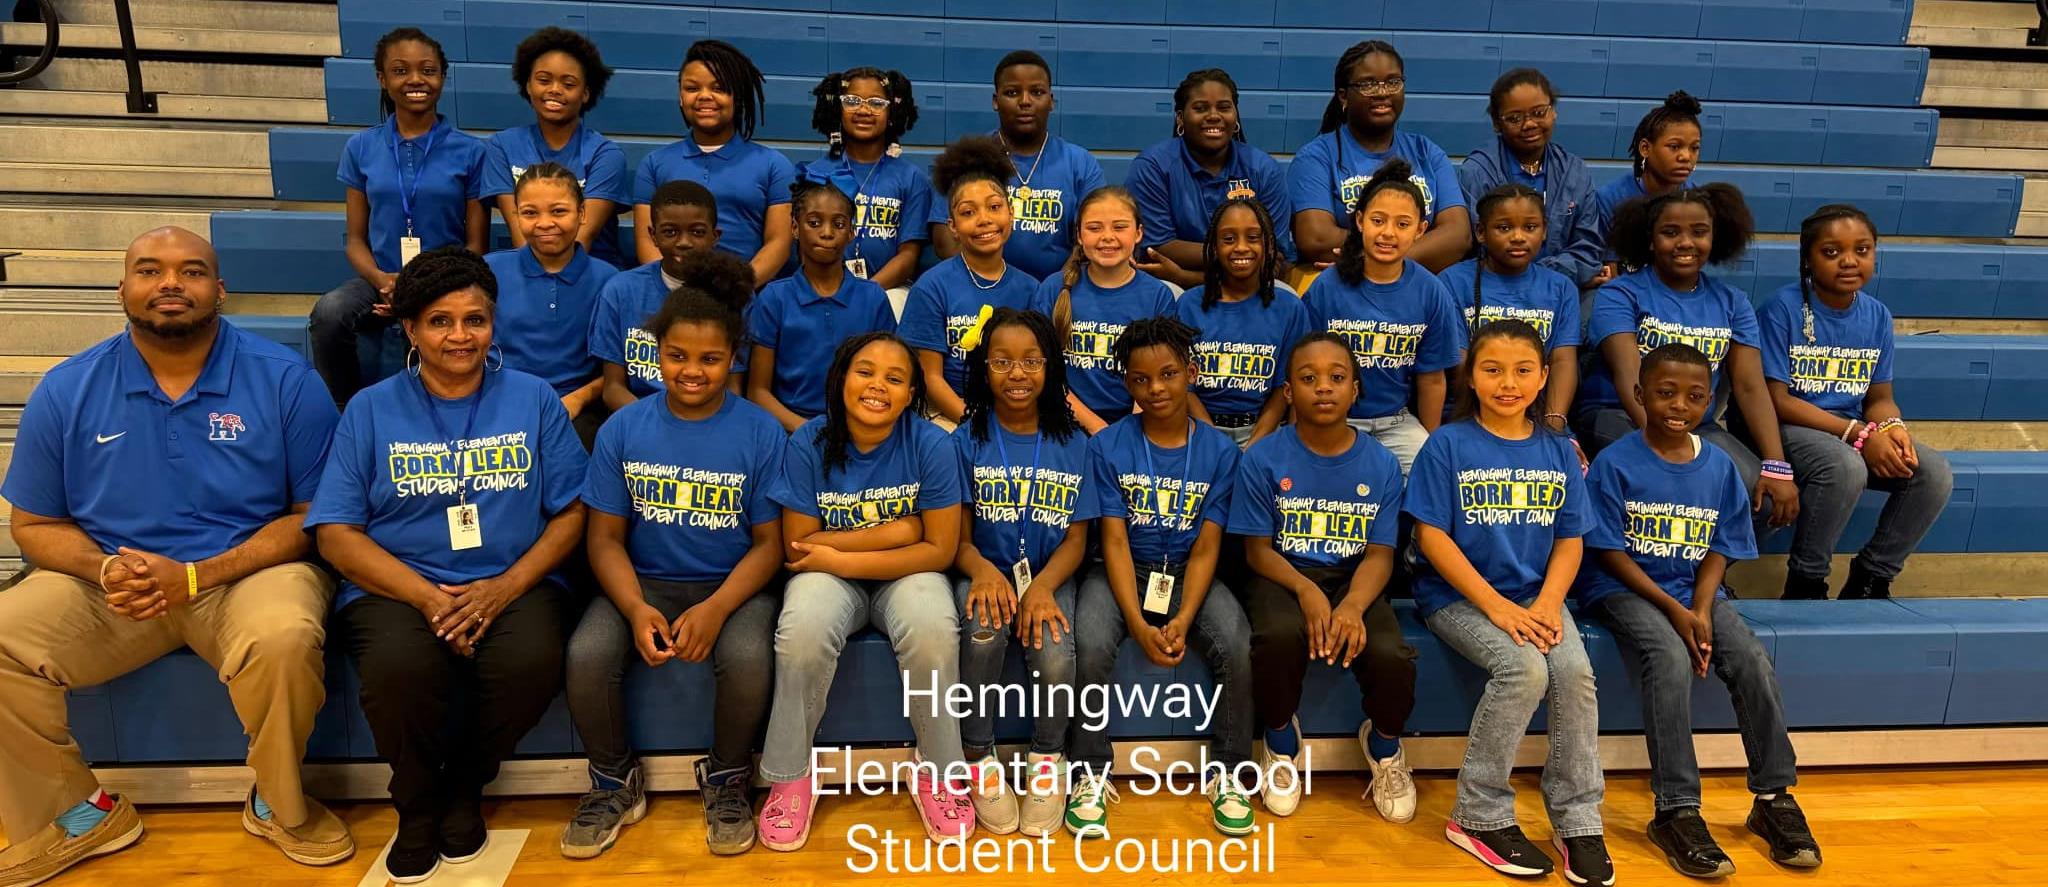 Hemingway Elementary Student Council 2023-2024. elementary students pictured along with school principal and guidance counselor